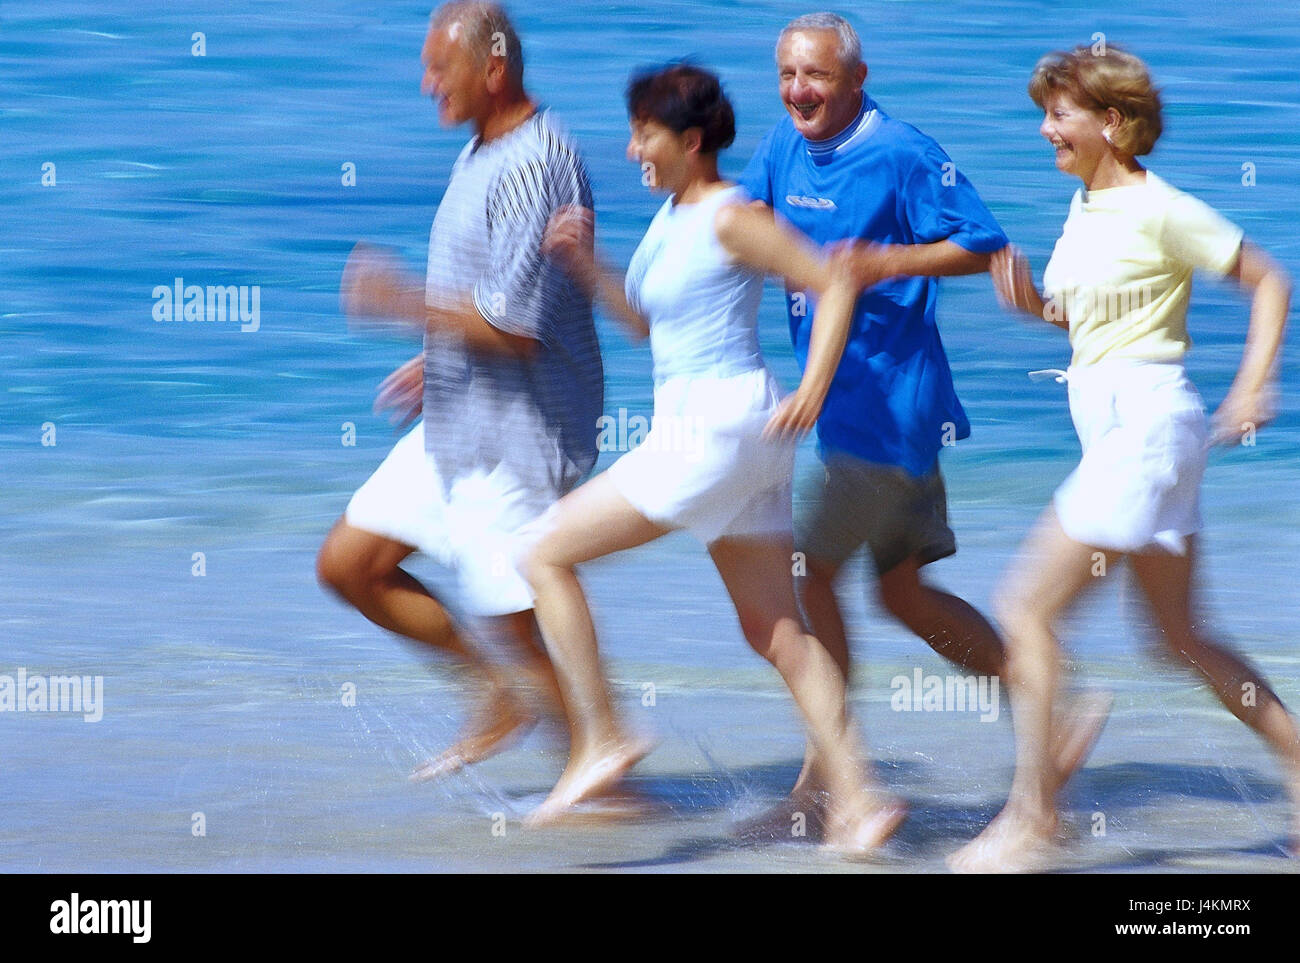 Couples, middle old person, beach run, blur summer, vacation, leisure time, lifestyle, four, friends, together, fun, happily, tuning, positively, sport, sportily, beach, sea, run, jog, jogging, fit fitness, agile, motion, activity, leisurewear, motion blur Stock Photo